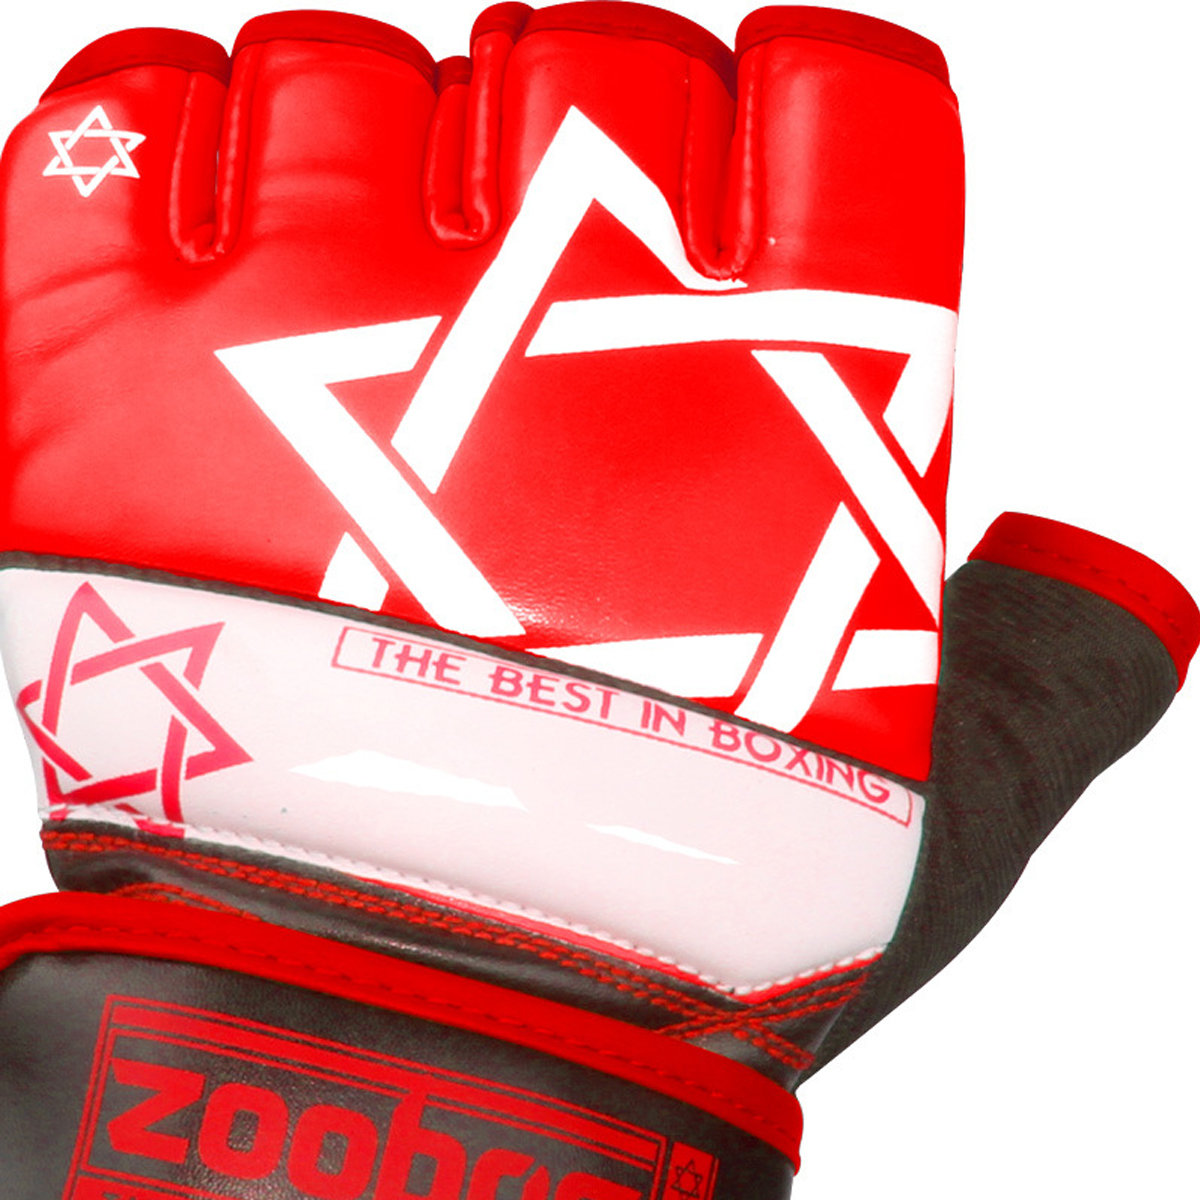 ZOOBOO Boxing Gloves Training Gloves Sparring Mitts Slimming & Exercising Boxing Gloves